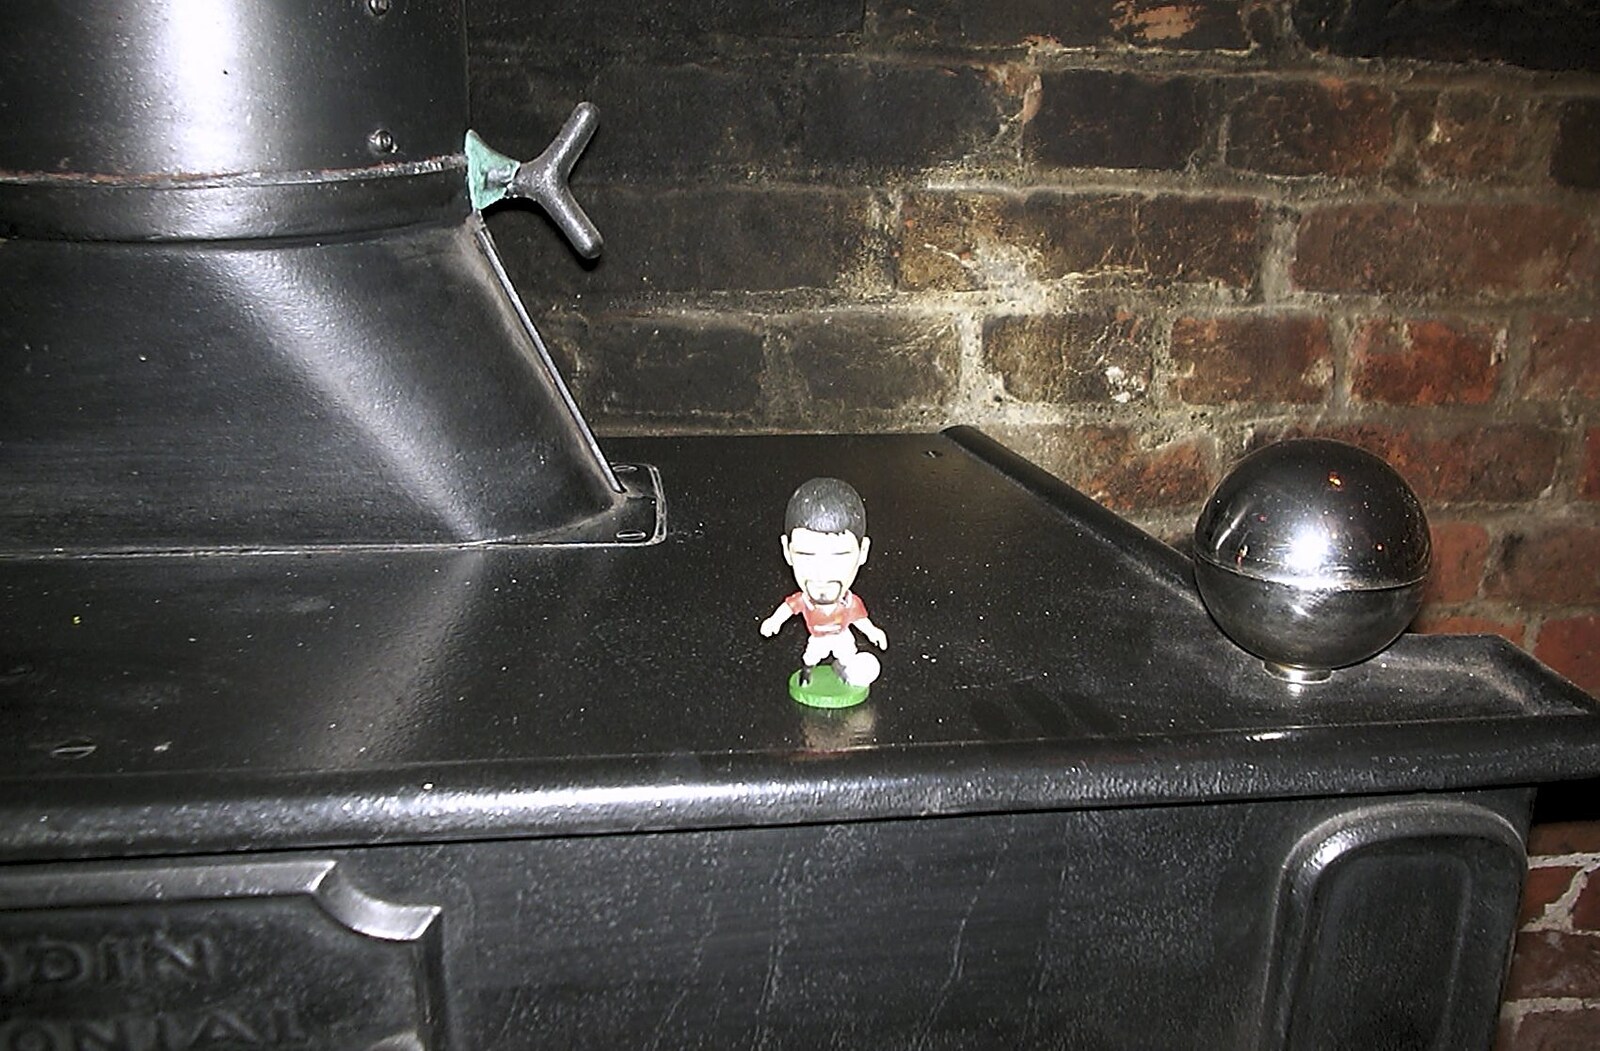 The tiny Roy Keane has appeared on the woodburner from Twenty Years at The Swan Inn, Brome, Suffolk - 15th November 2003